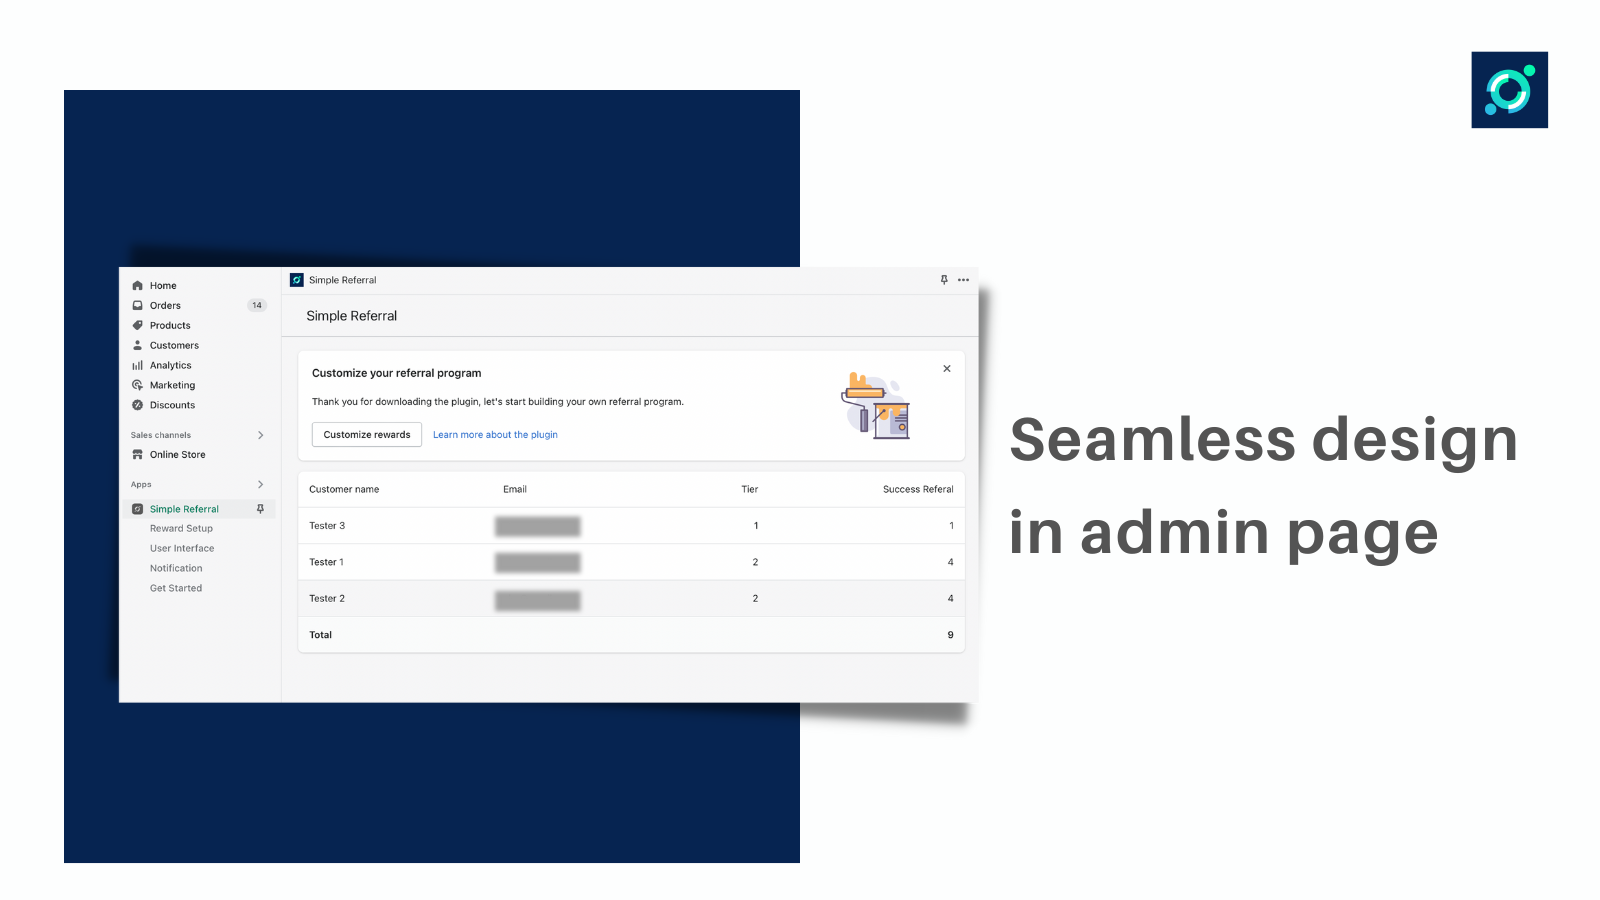 Seamless design in admin page